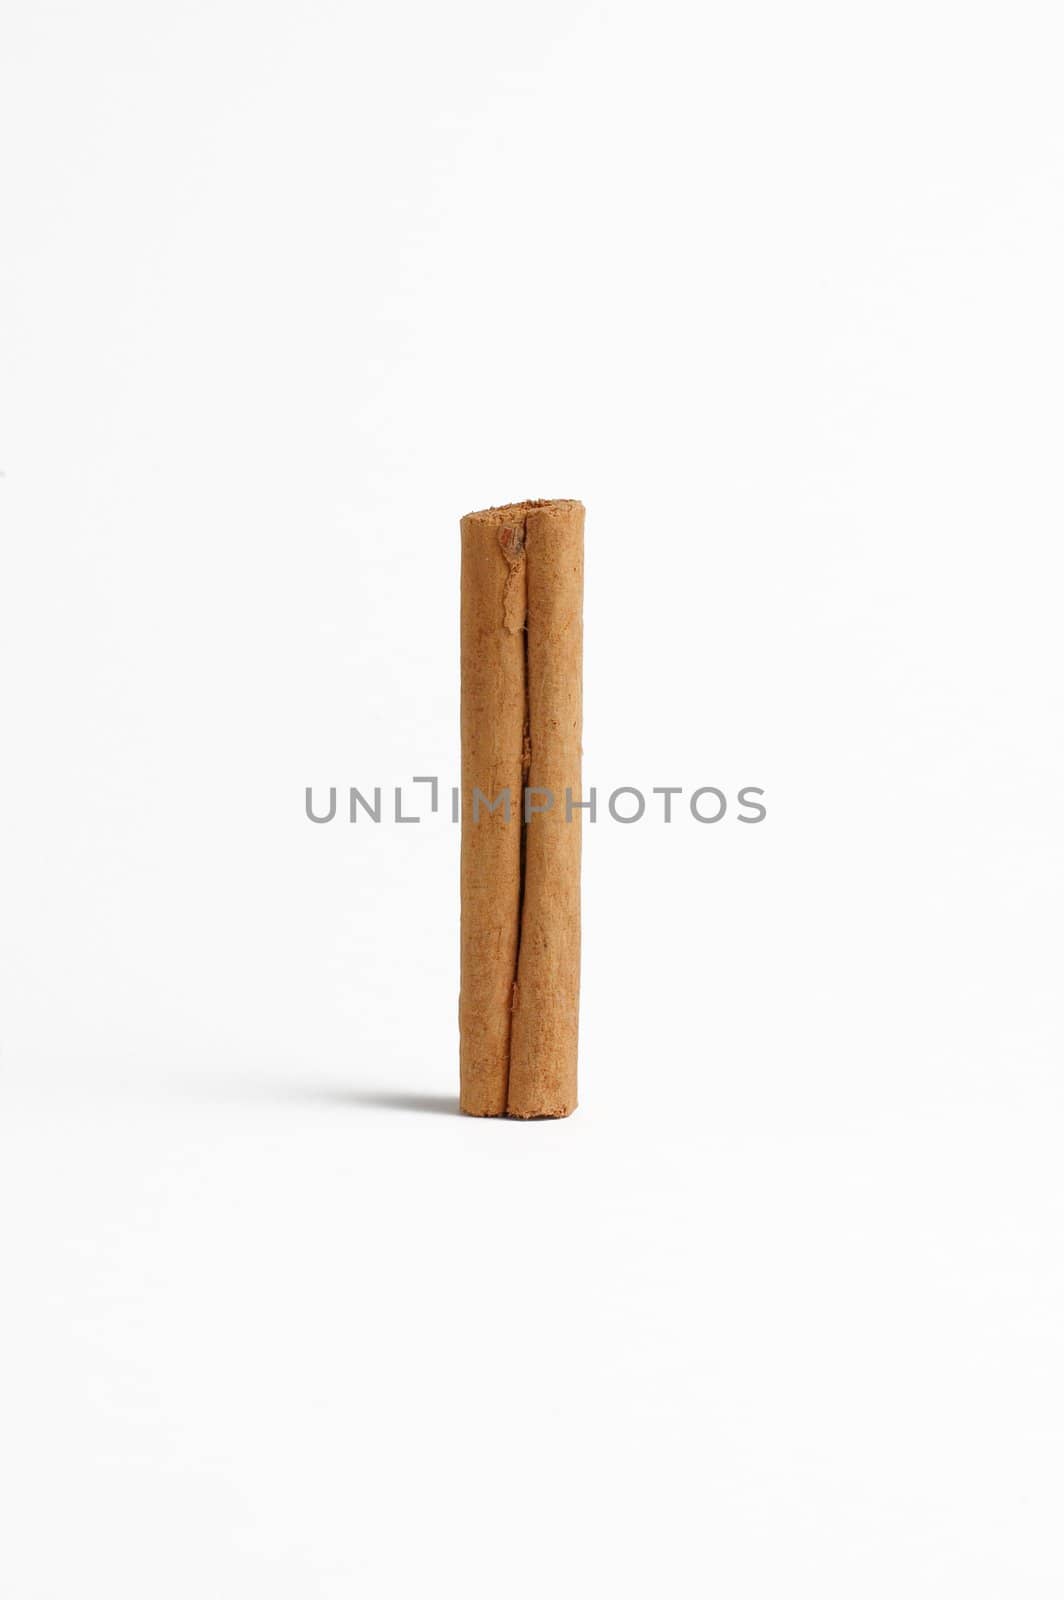 Cinnamon stick display isolated on white background.